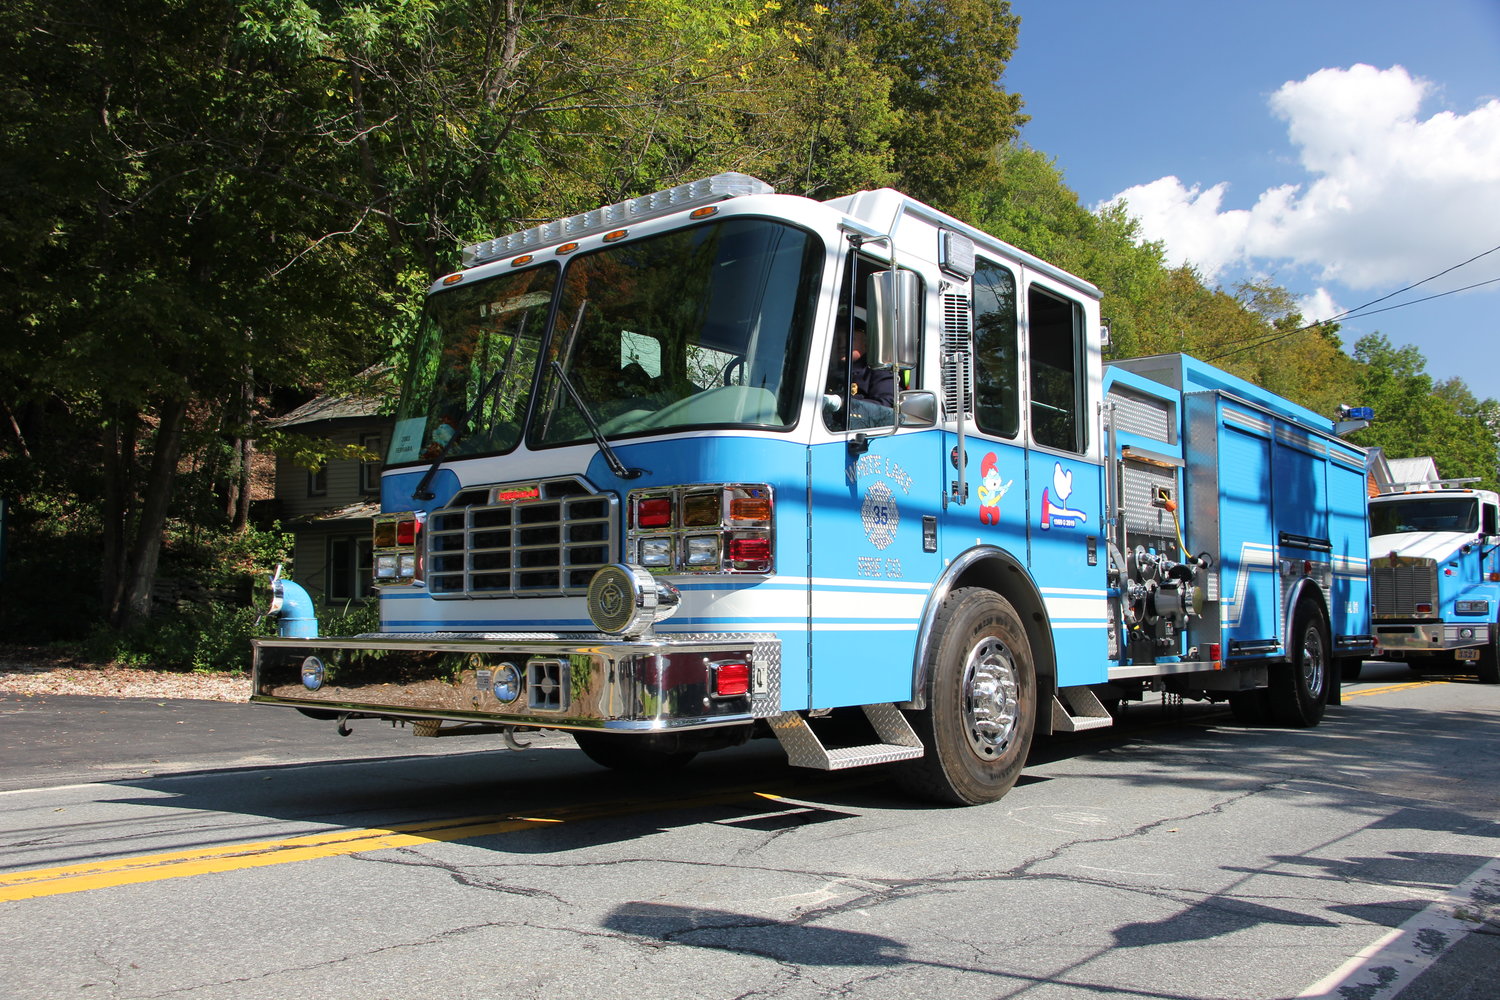 Another eye-catching fire truck – this one from White Lake.